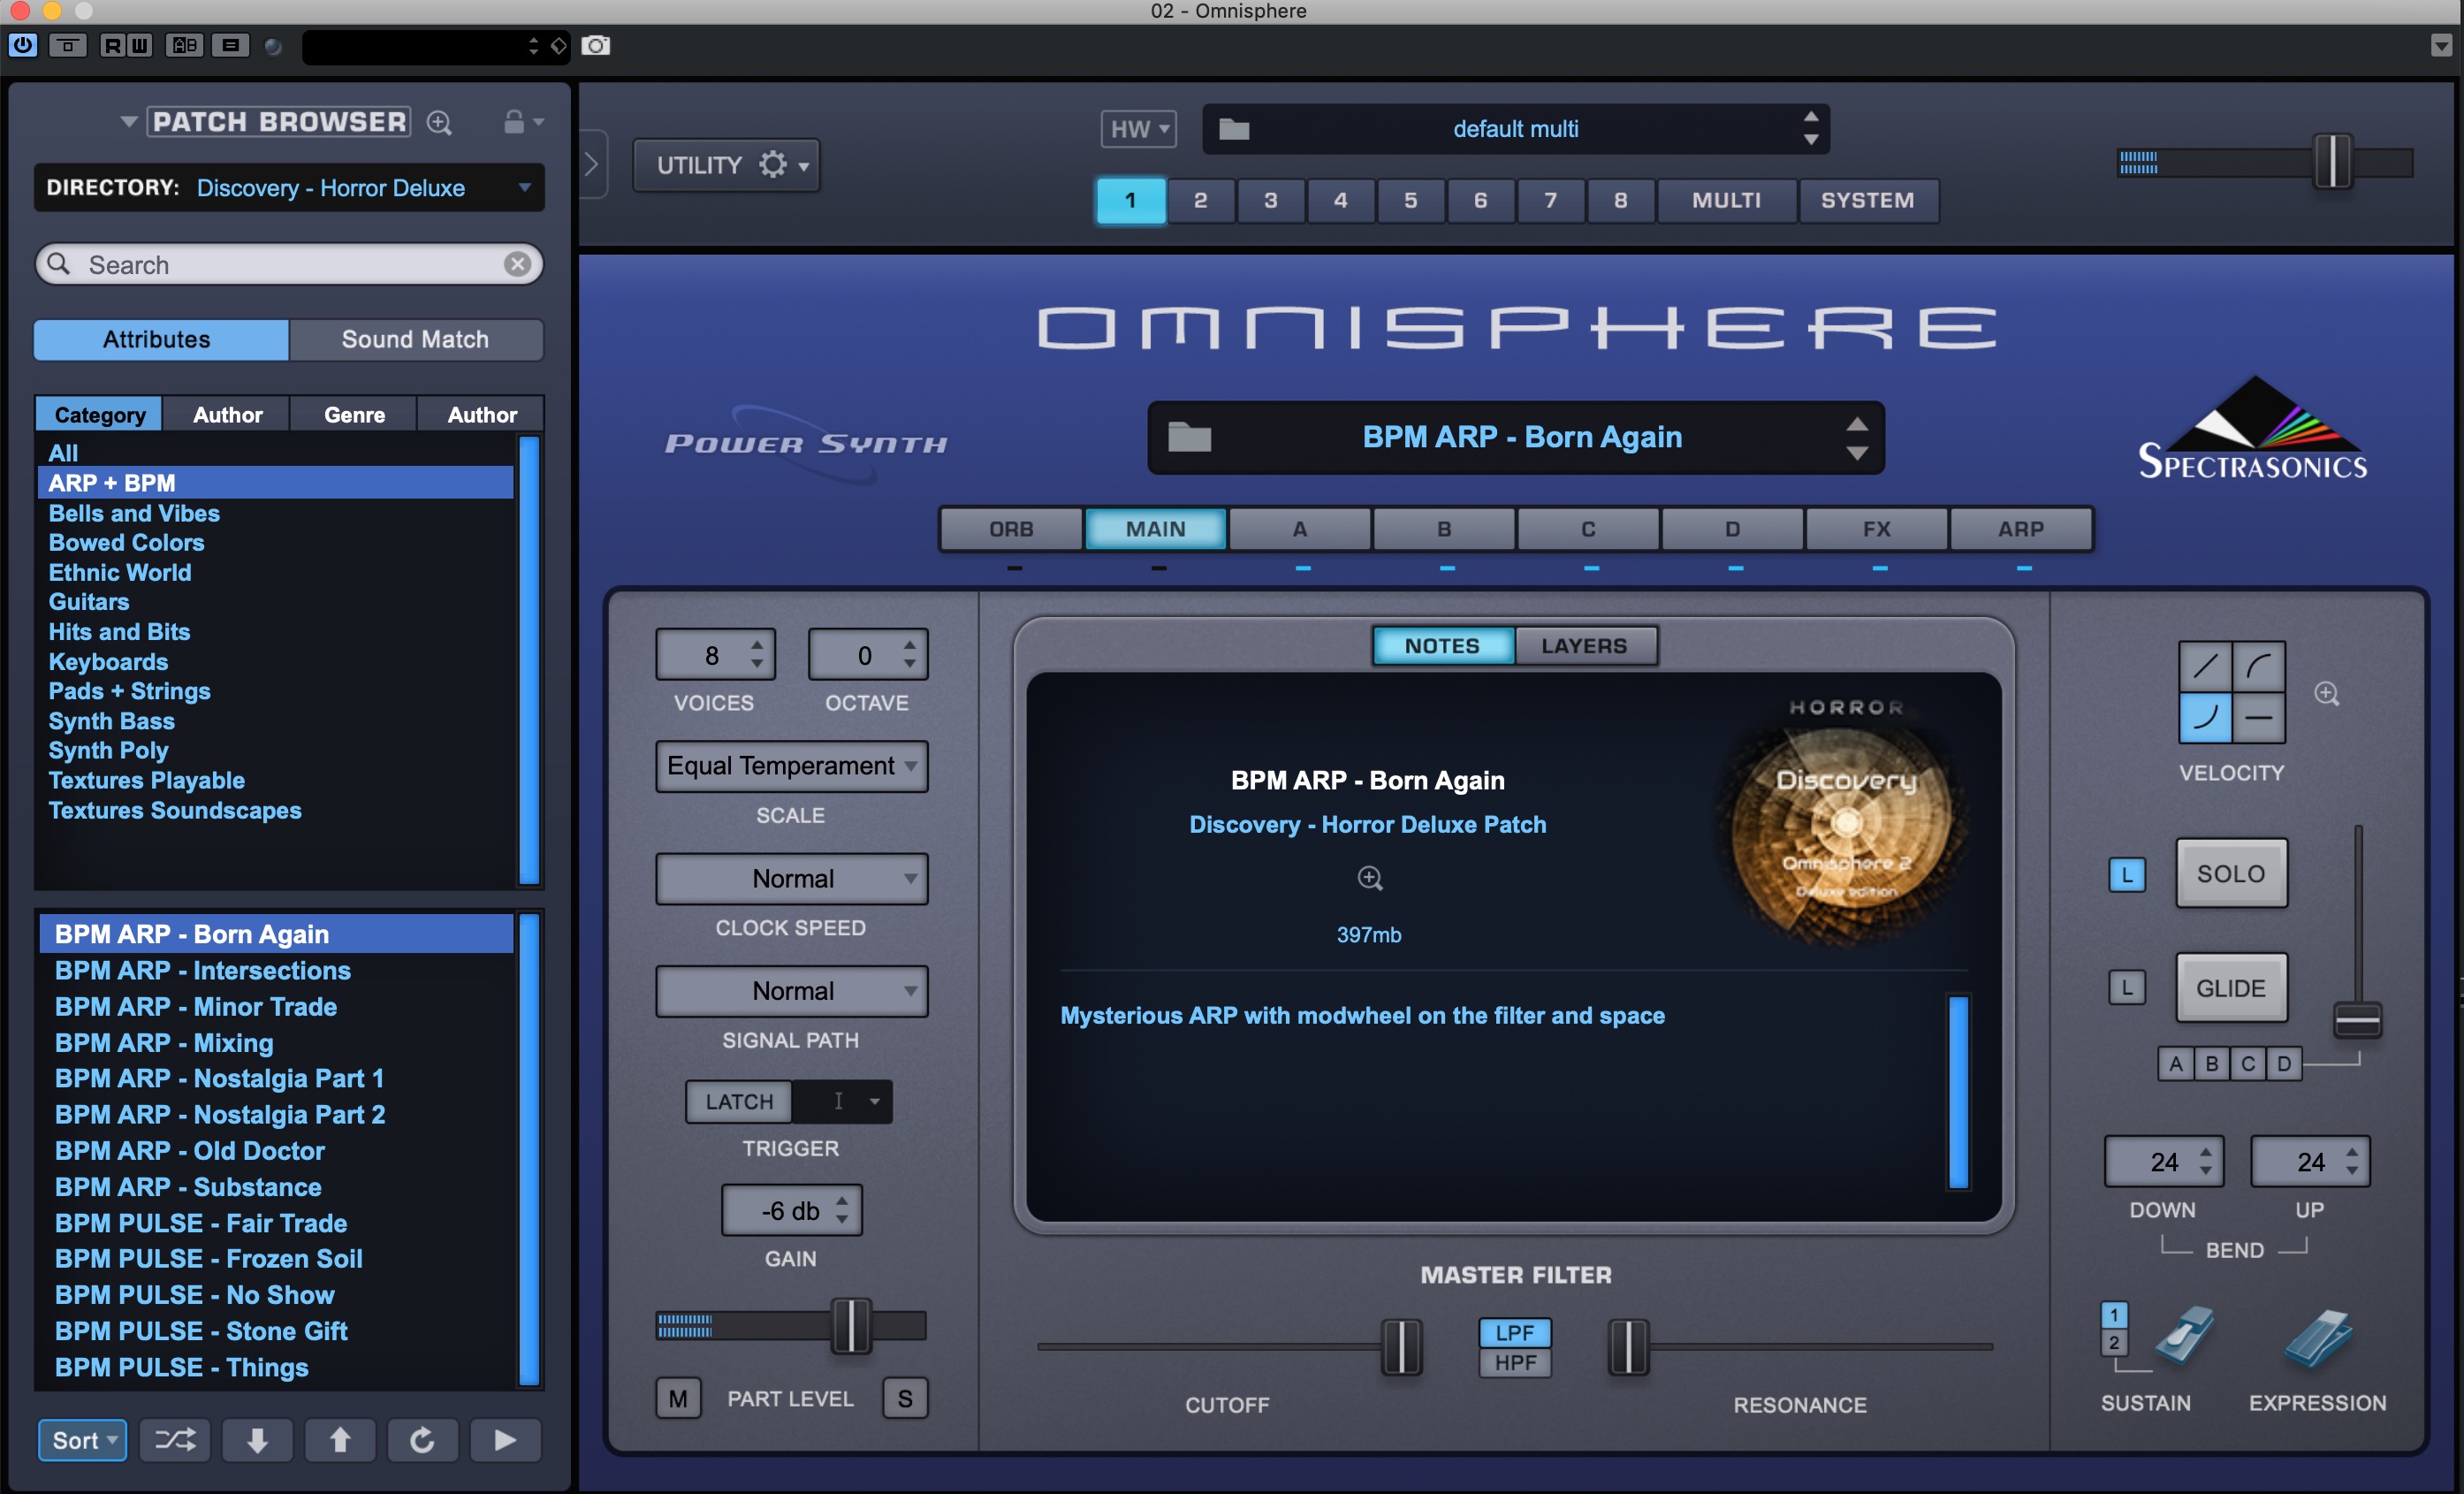 DISCOVERY – HORROR Deluxe – OMNISPHERE 2 Patch